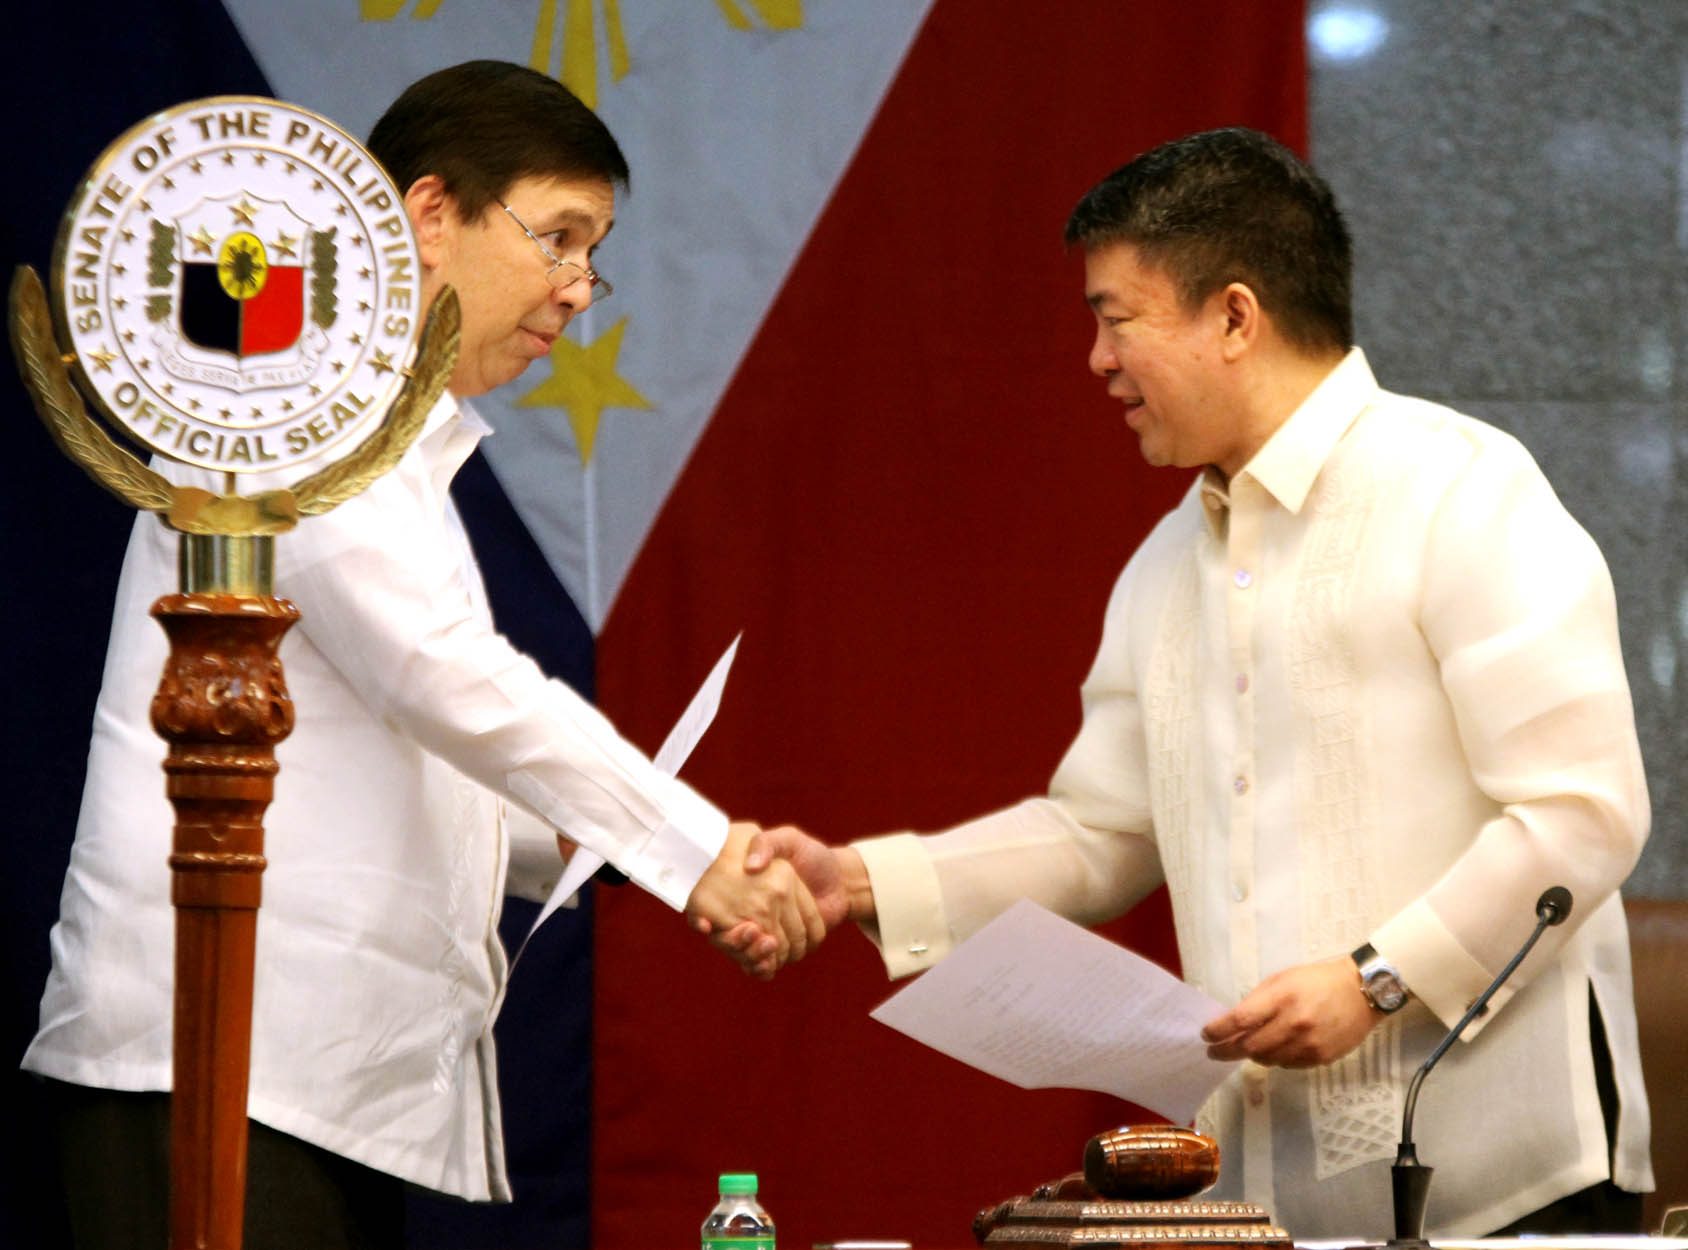 NEW  PRO-TEMPORE: Senate President Aquilino Pimentel III congratulates newly-elected Senate President Pro Tempore and former Minority Leader Ralph Recto after the latter took his oath on Monday, February 27, 2017. Photo by PRIB 